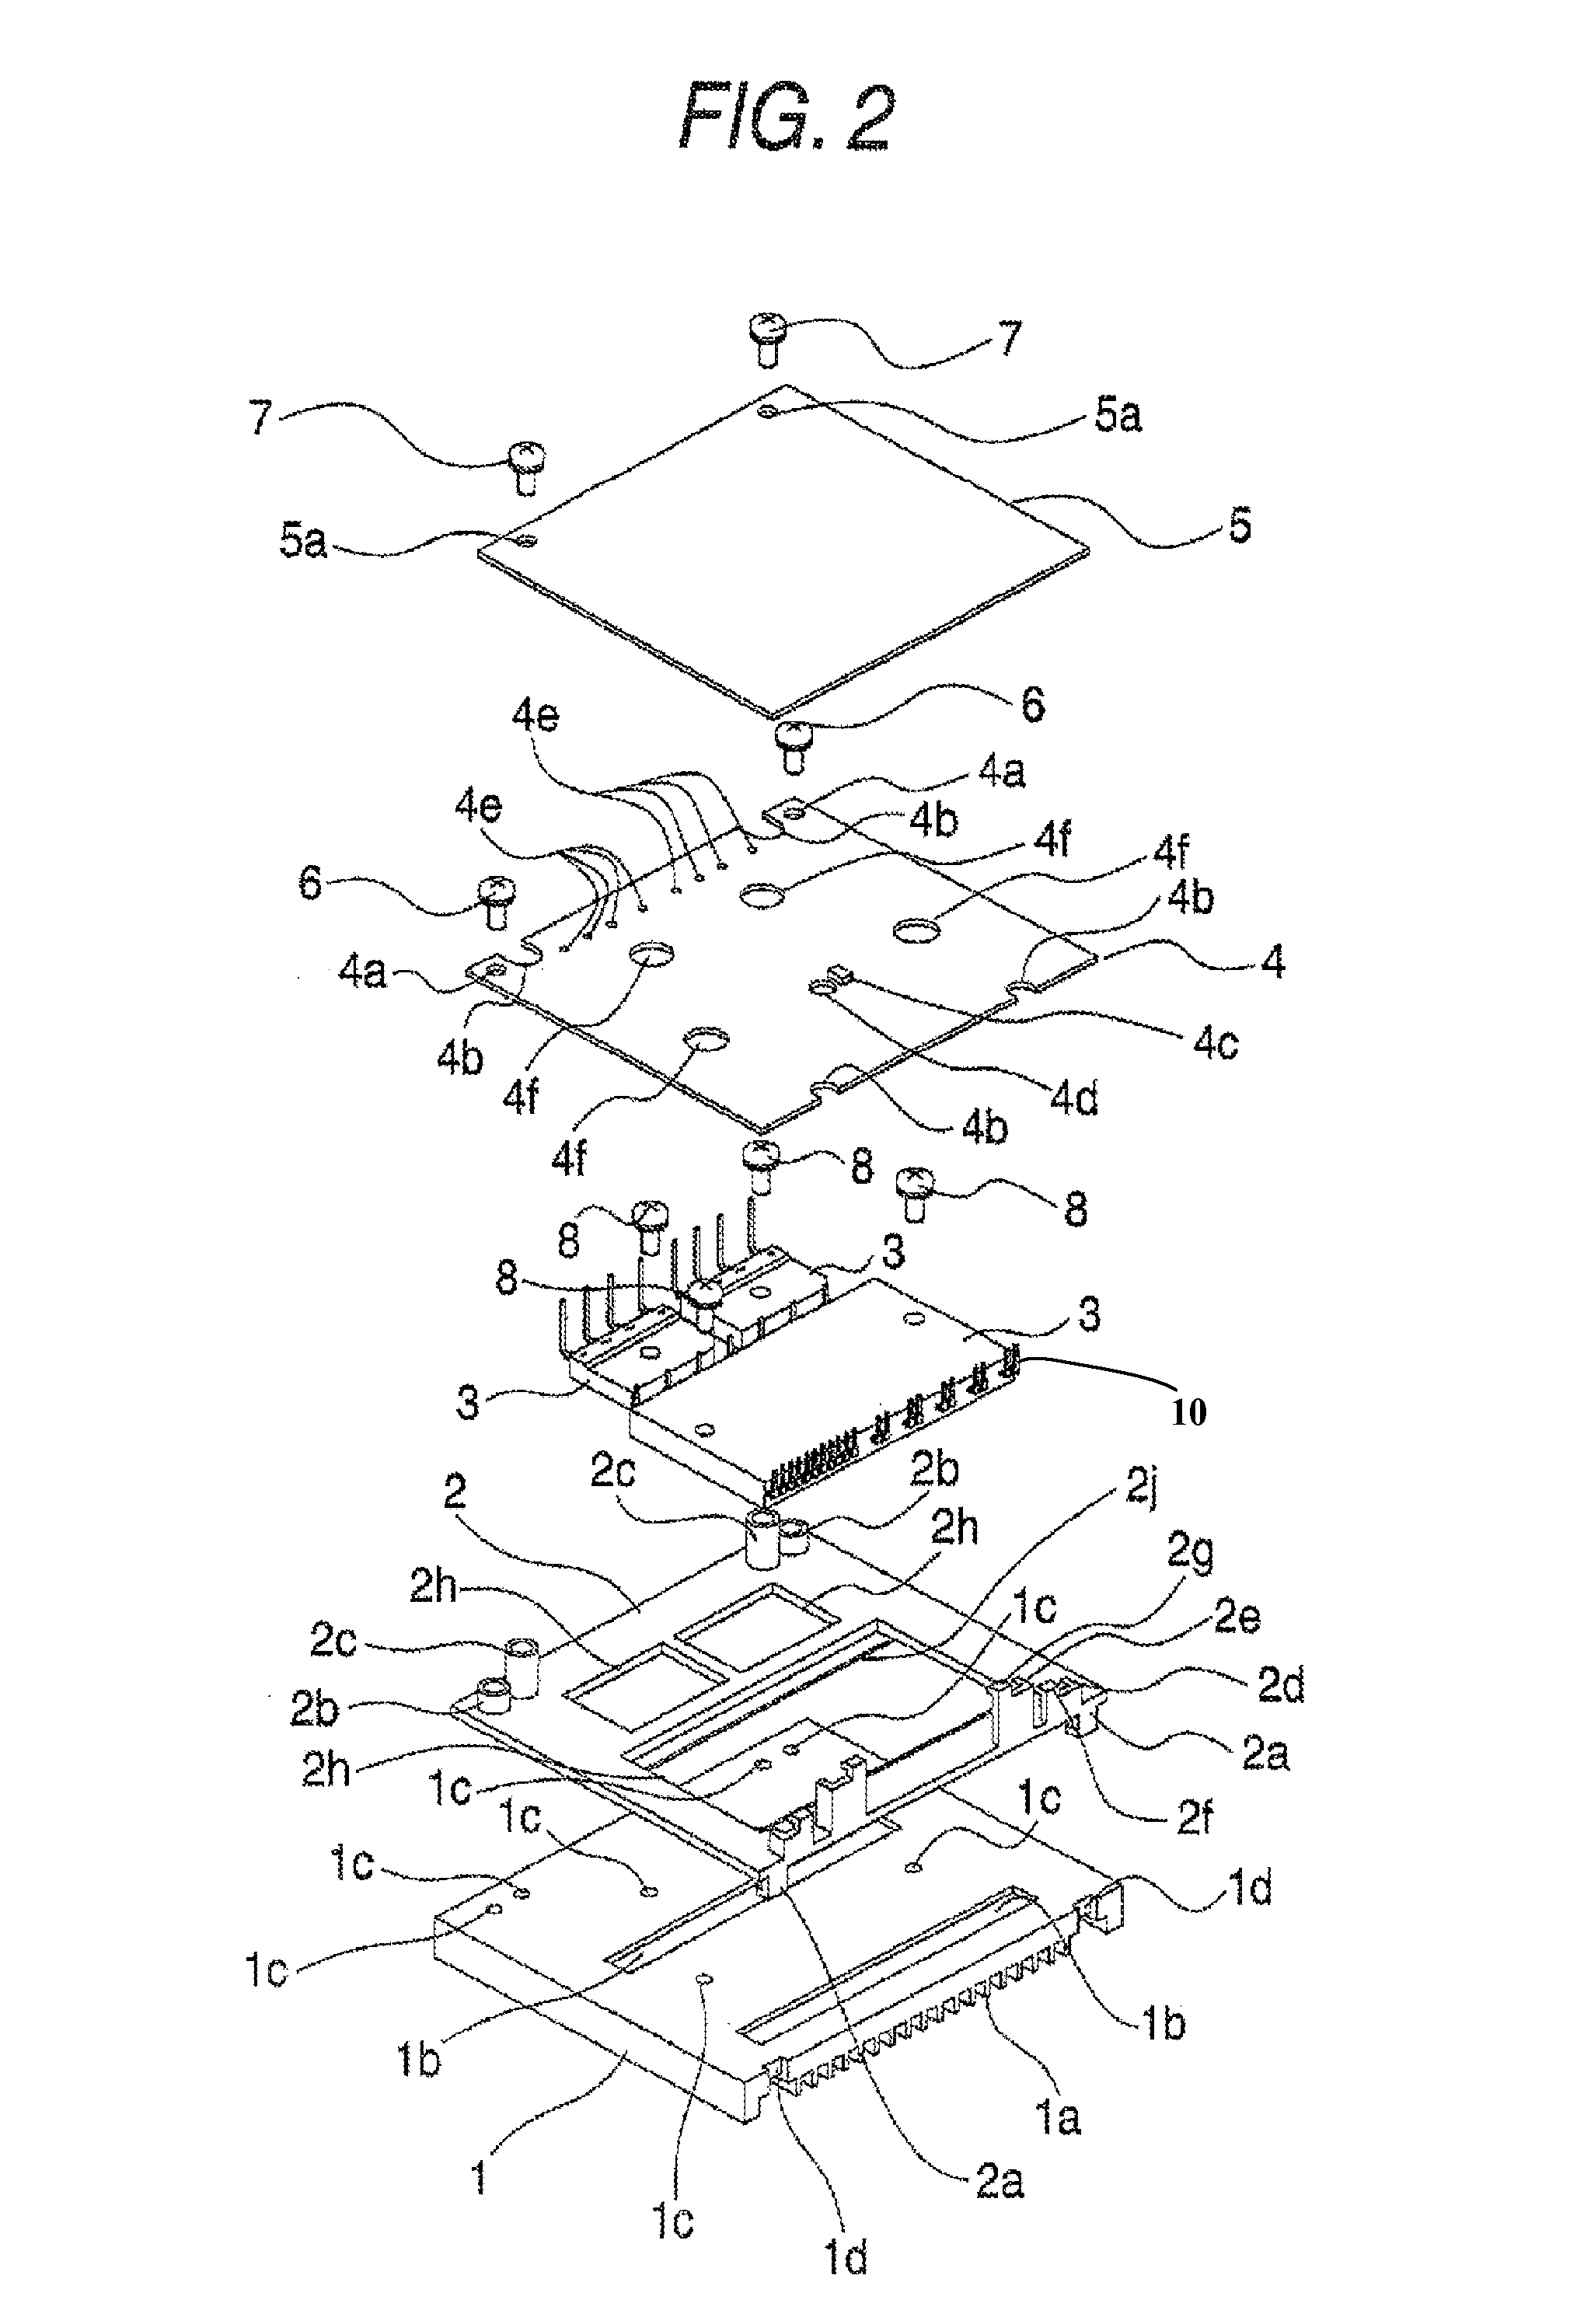 Motor control apparatus and method of assembling motor control apparatus